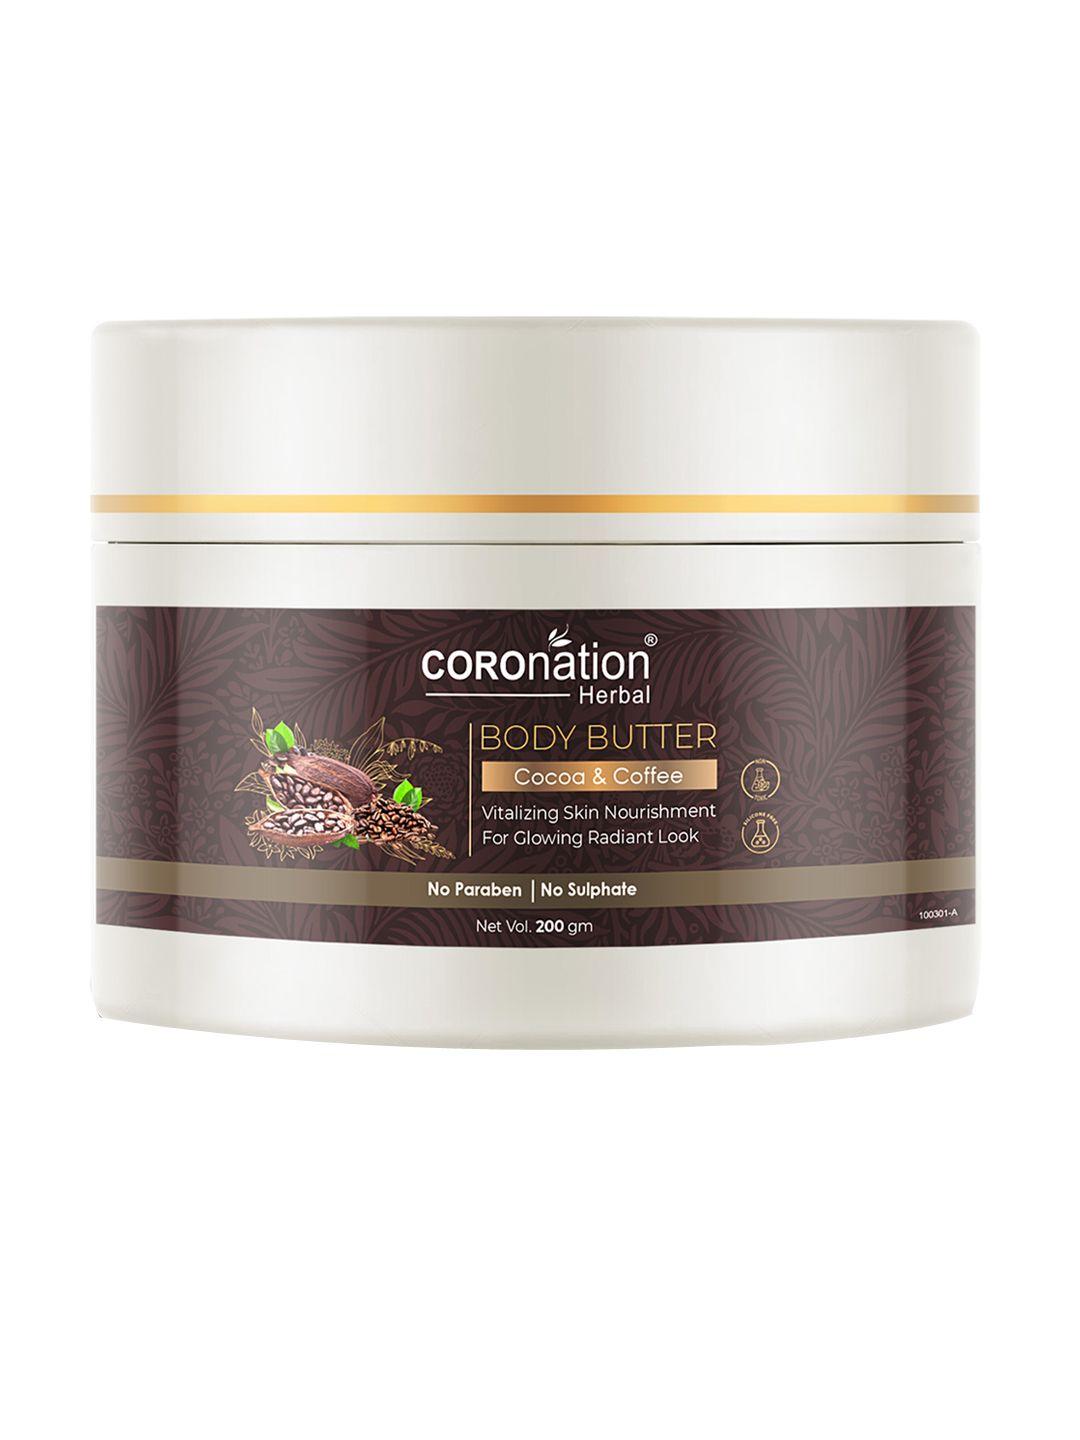 coronation herbal cocoa & coffee body butter body lotion 200 gm